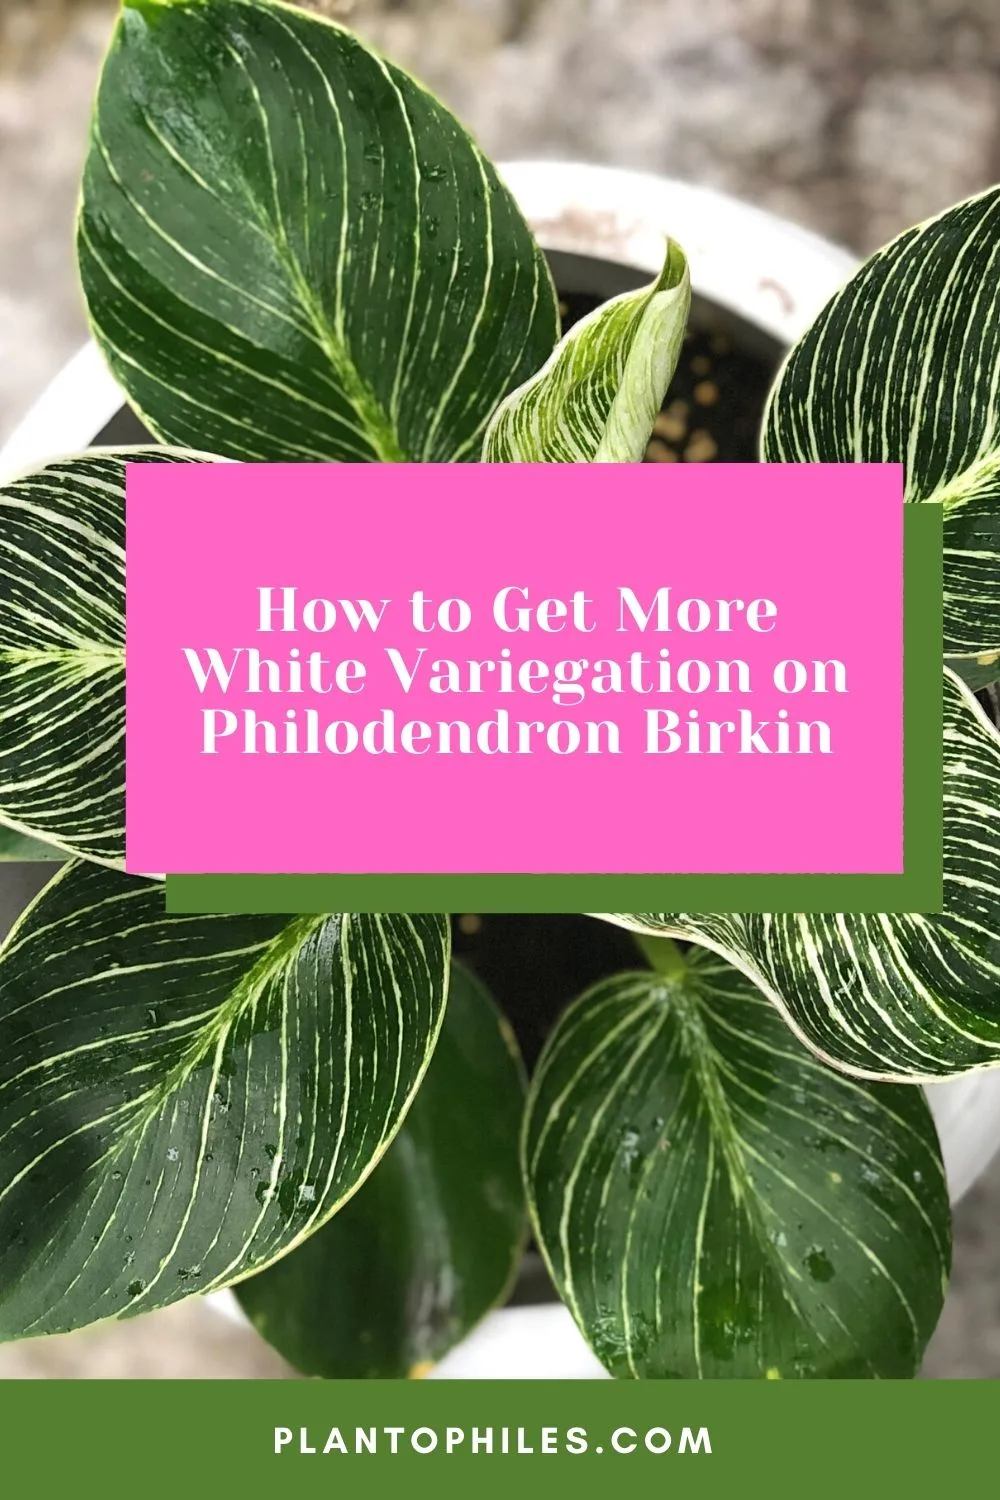 How to Get More White Variegation on Philodendron Birkin